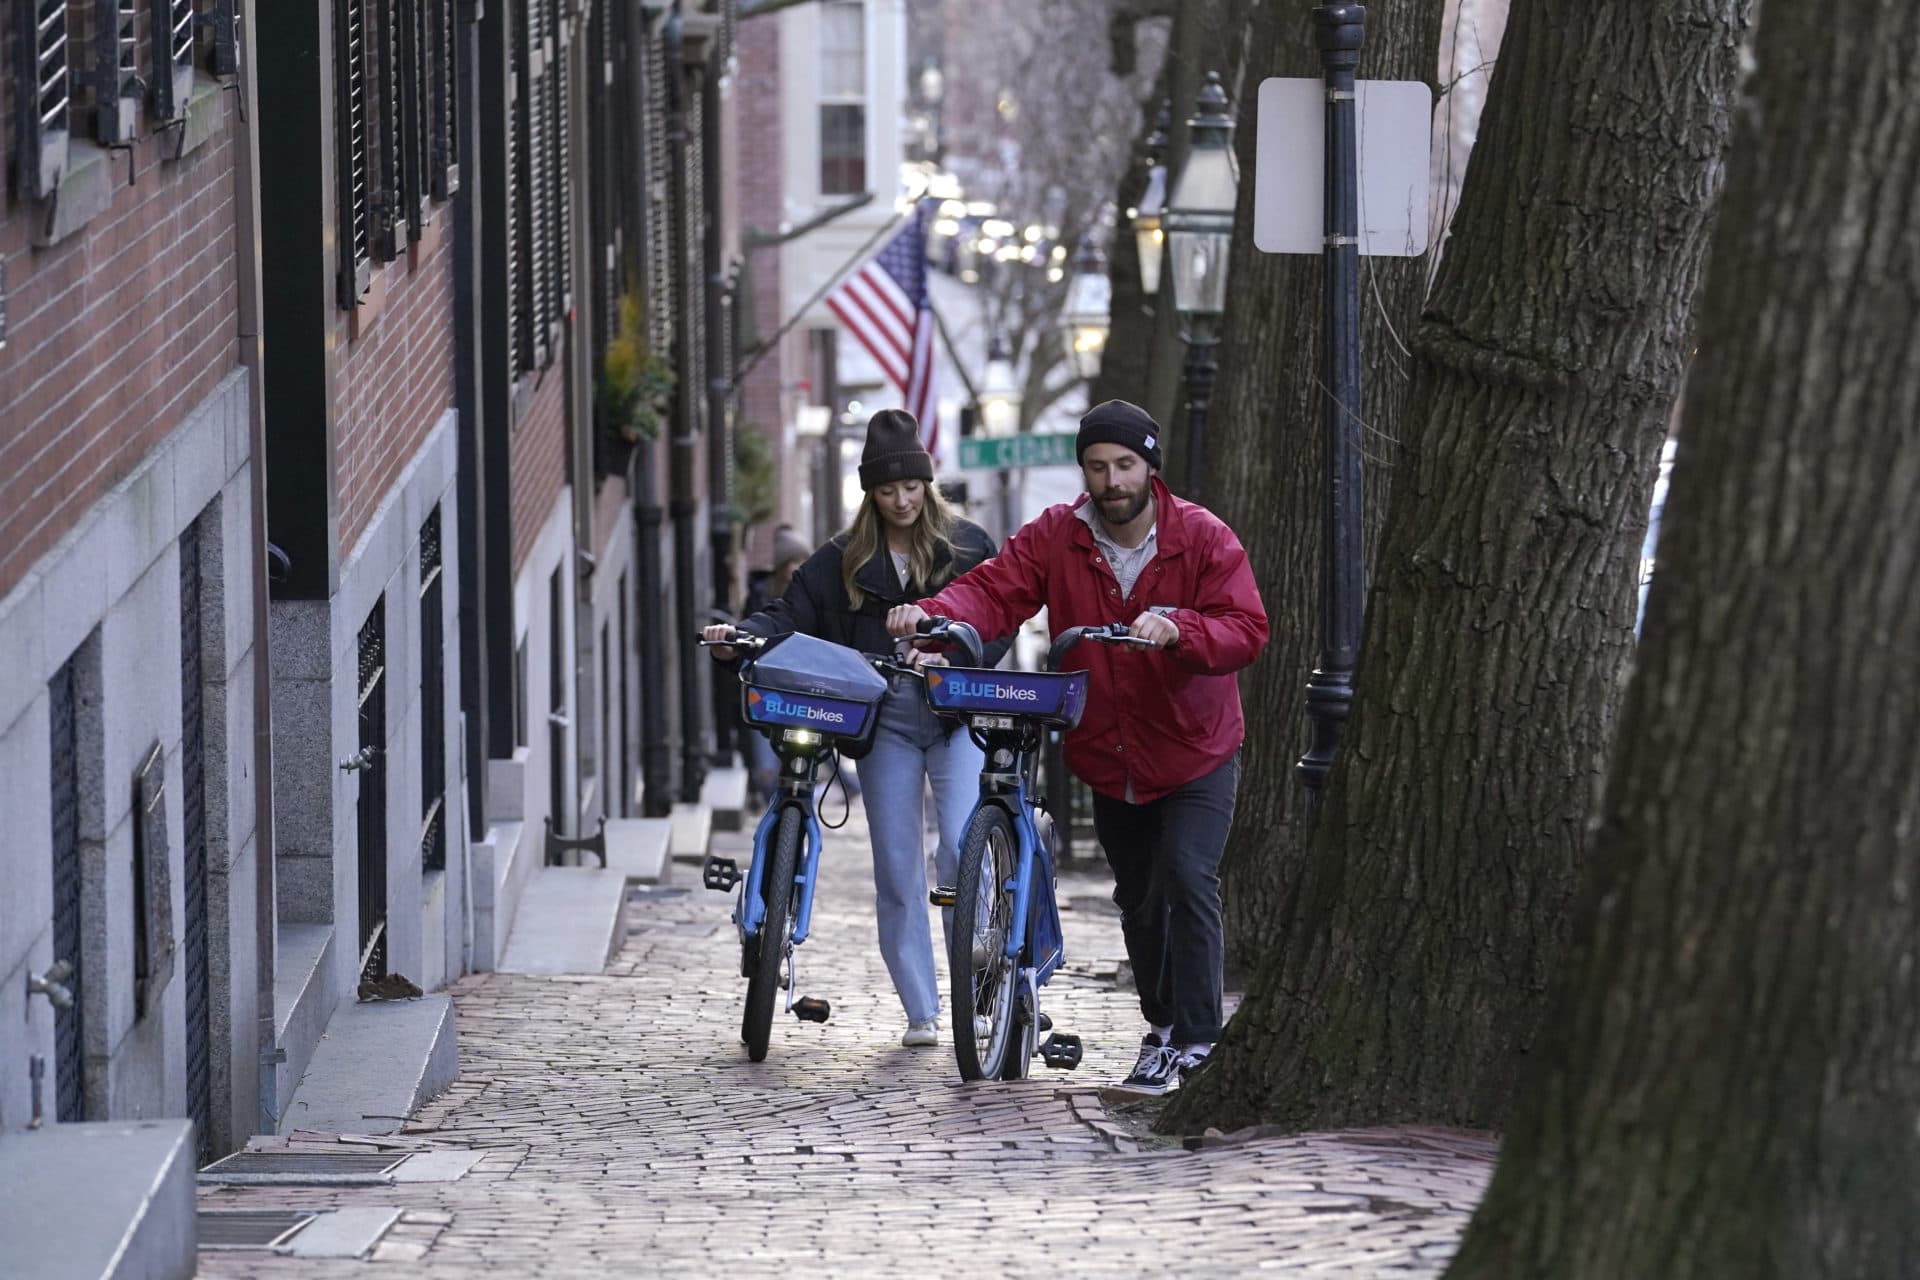 Passers-by walk their bikes up a hill in a residential area near the Statehouse on Beacon Hill, Feb. 13, in Boston.(Steven Senne/AP)